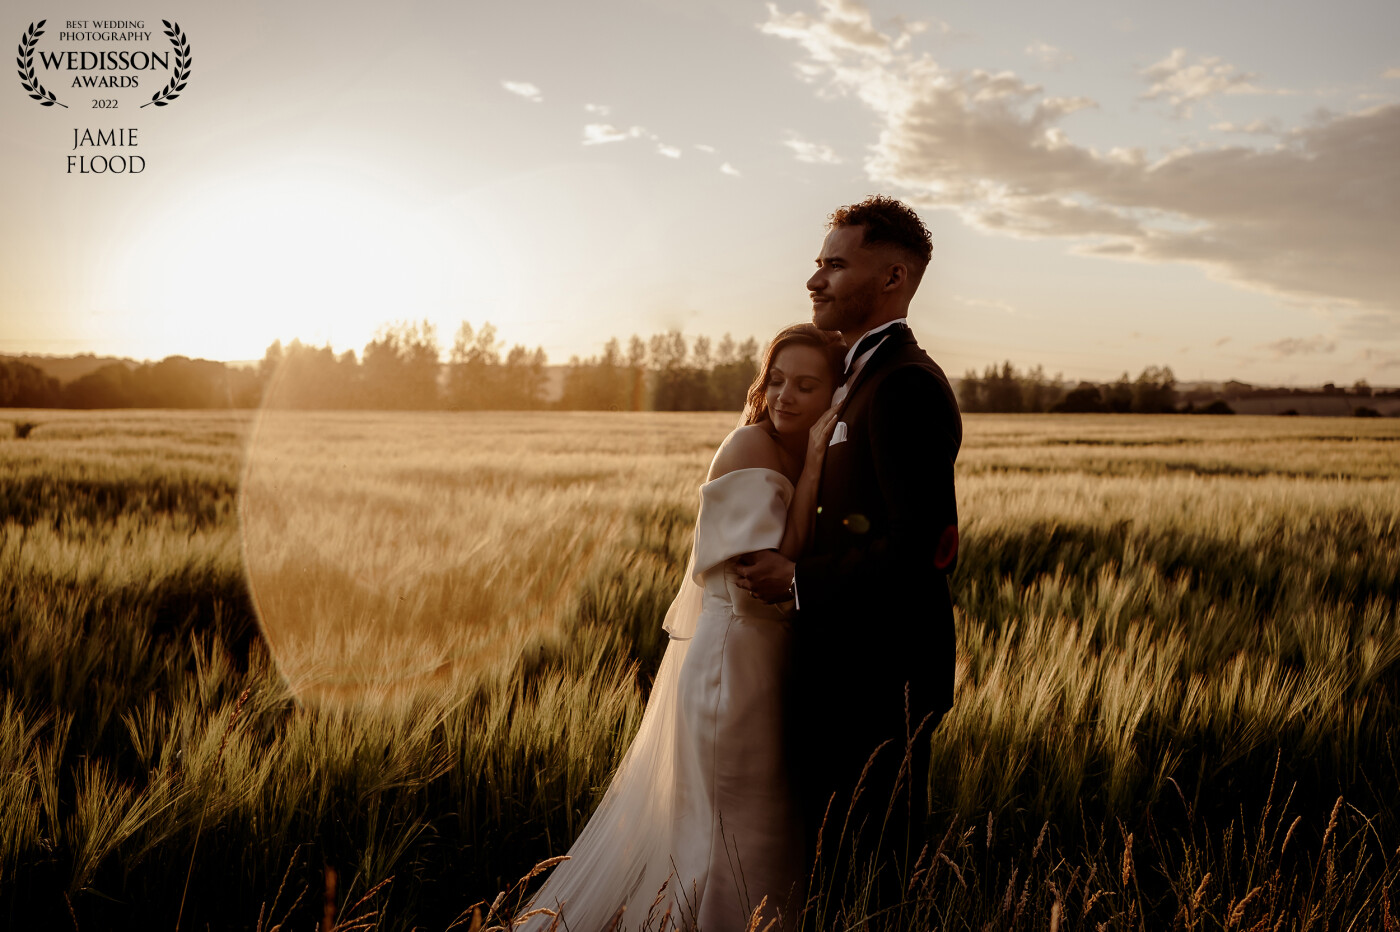 Sunset at Cherelle and Carlton’s gorgeous wedding in Farnham, Surrey <br />
<br />
Just one hour before the clouds had opened up and soaked the venue before giving way to this beautiful light